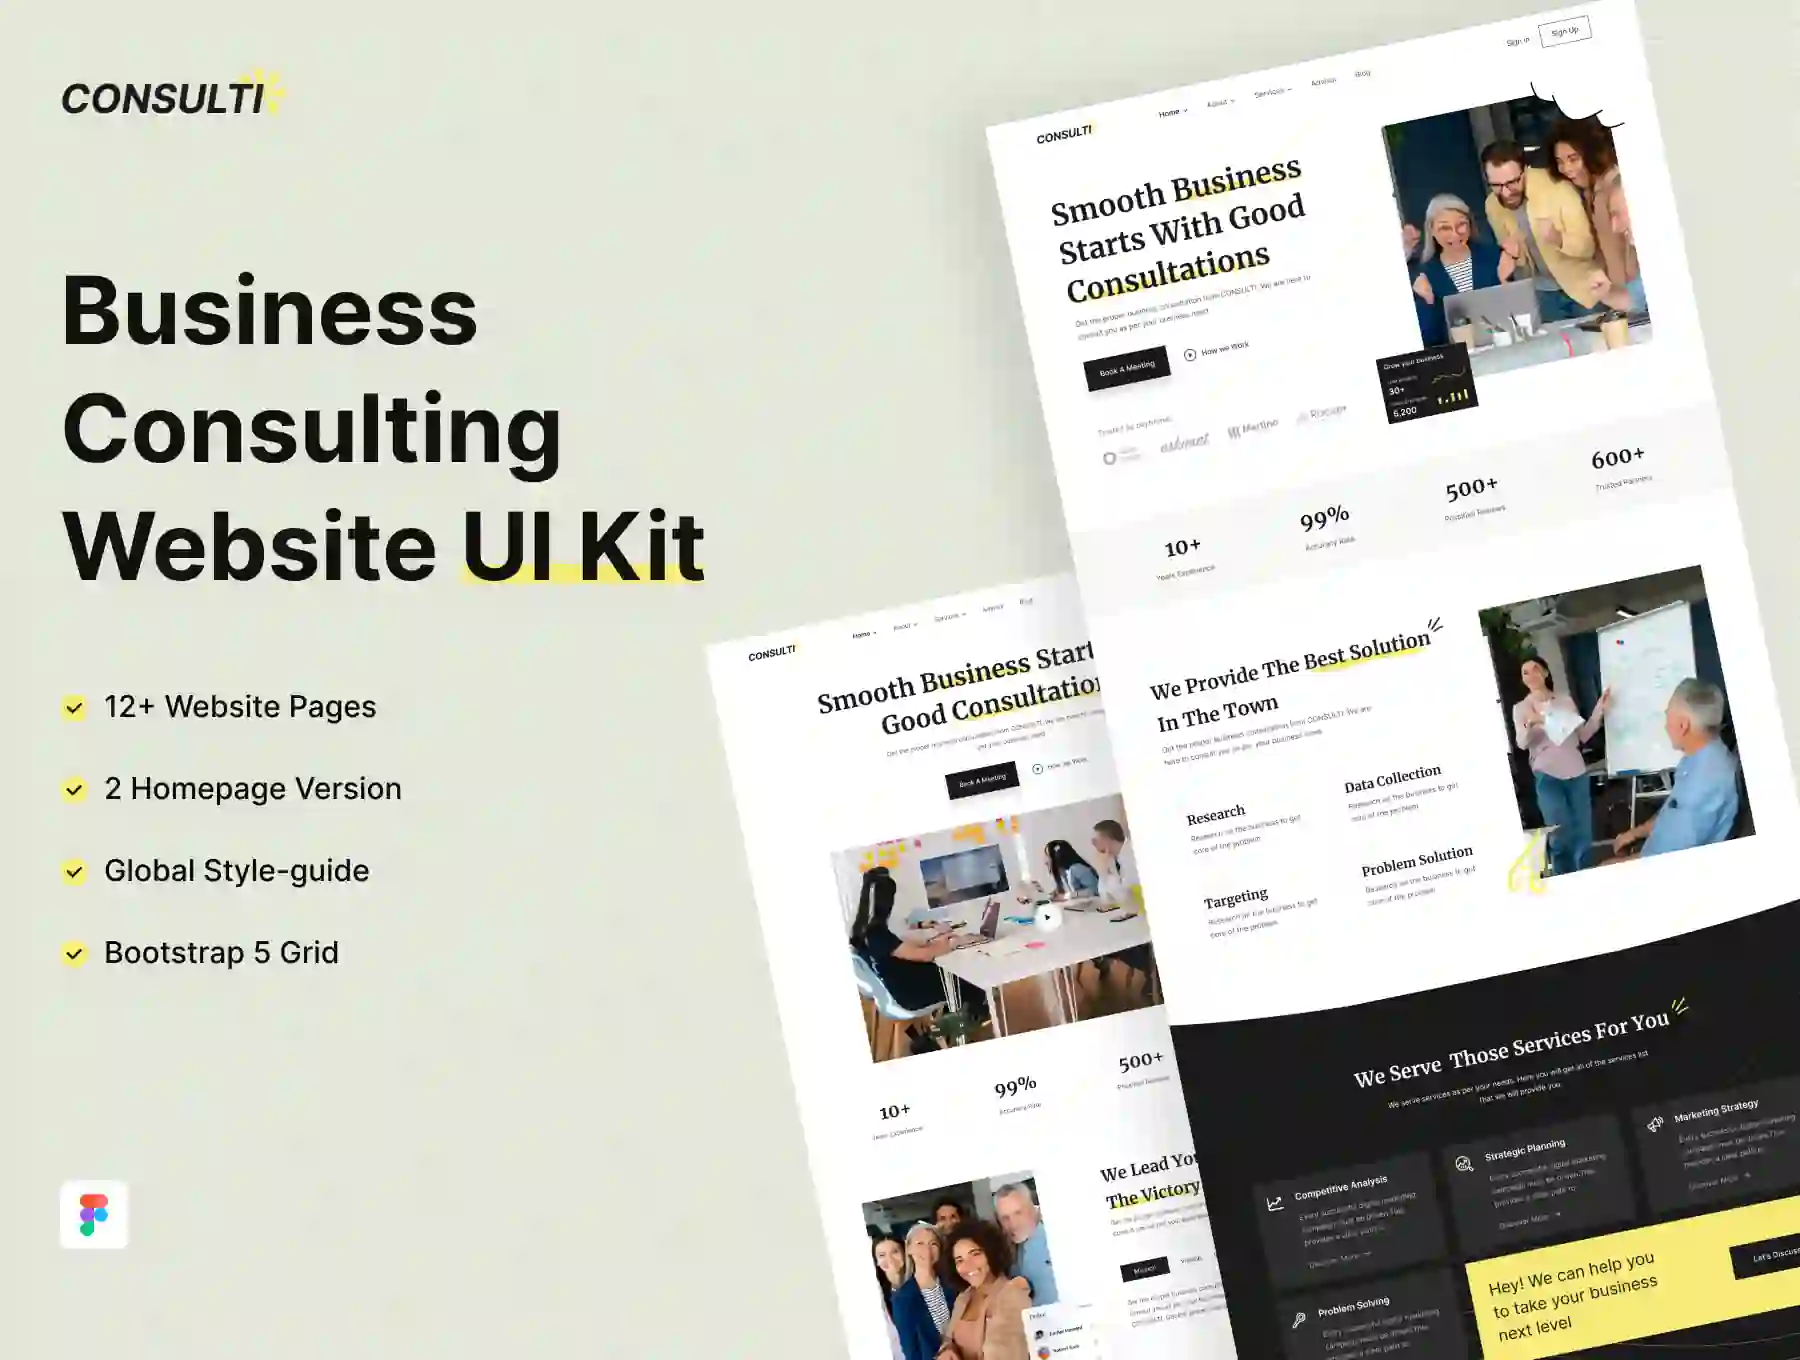 Consulti - Business Consulting Website UI Kit